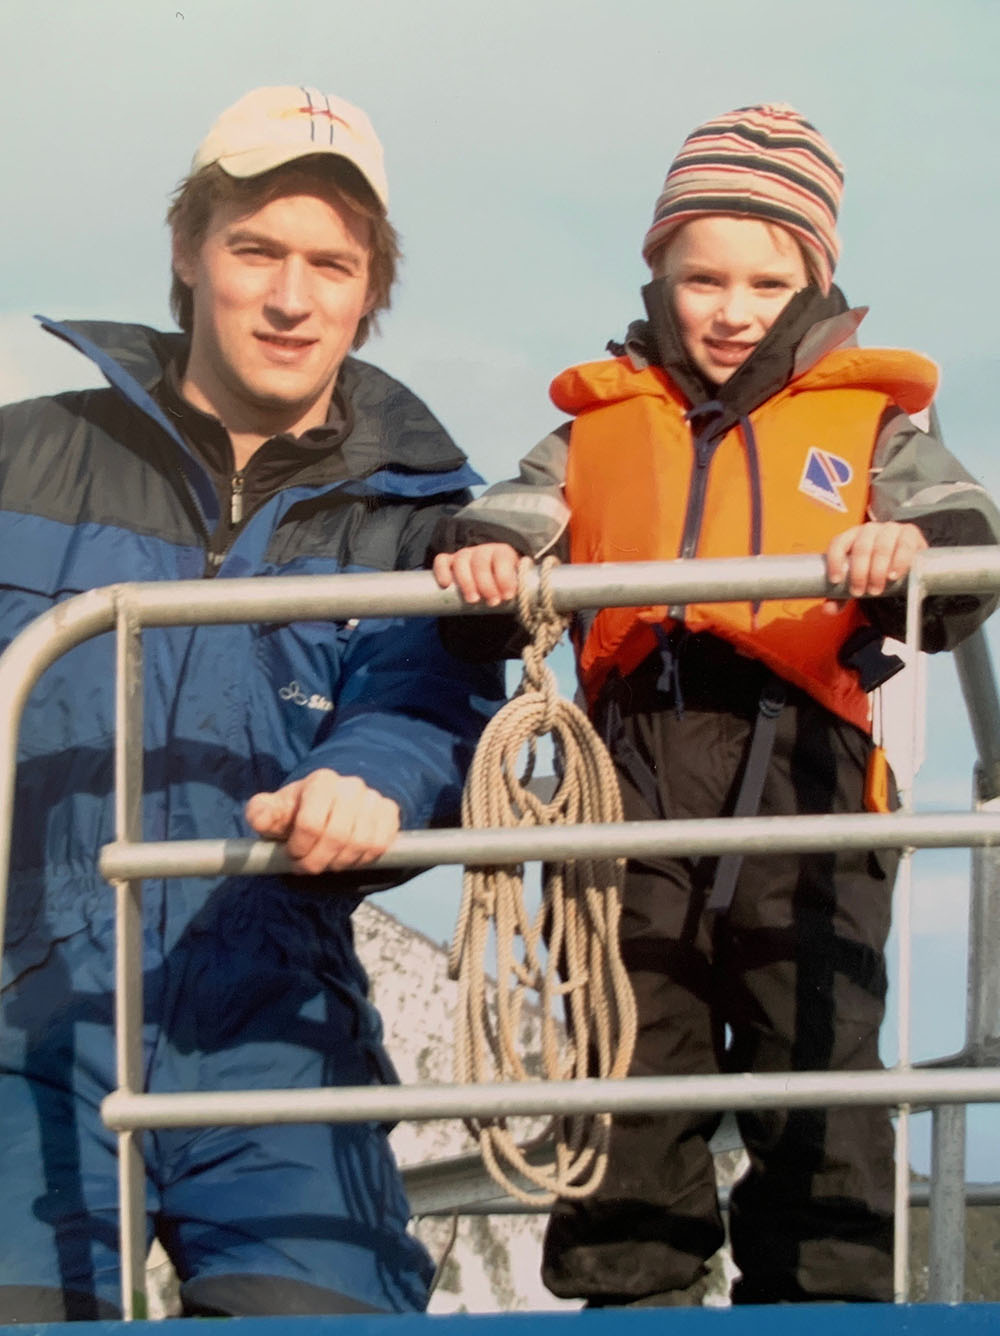 Johan Andreassen and a young Emil Andreassen on a salmon farm vessel